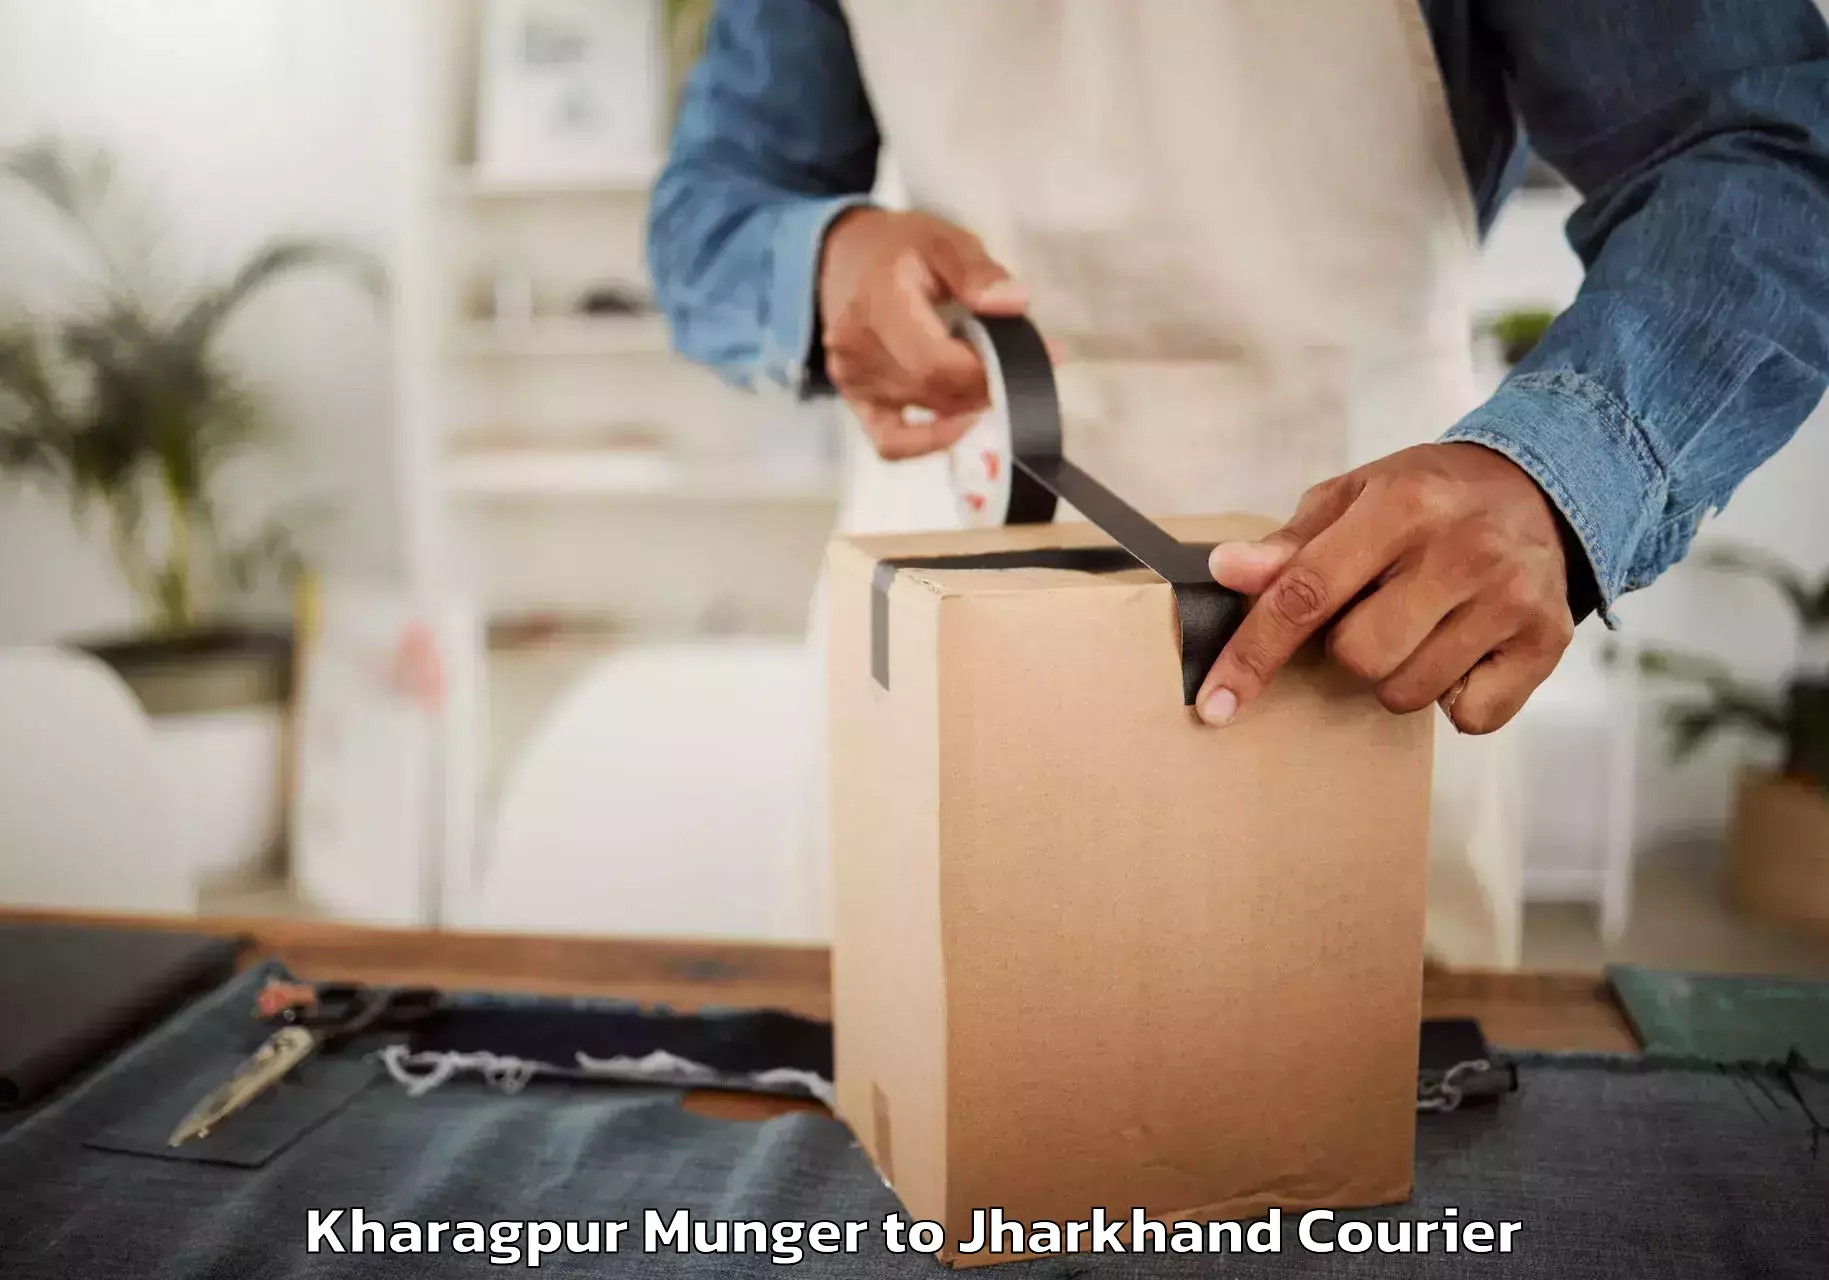 Efficient furniture movers in Kharagpur Munger to Chatra